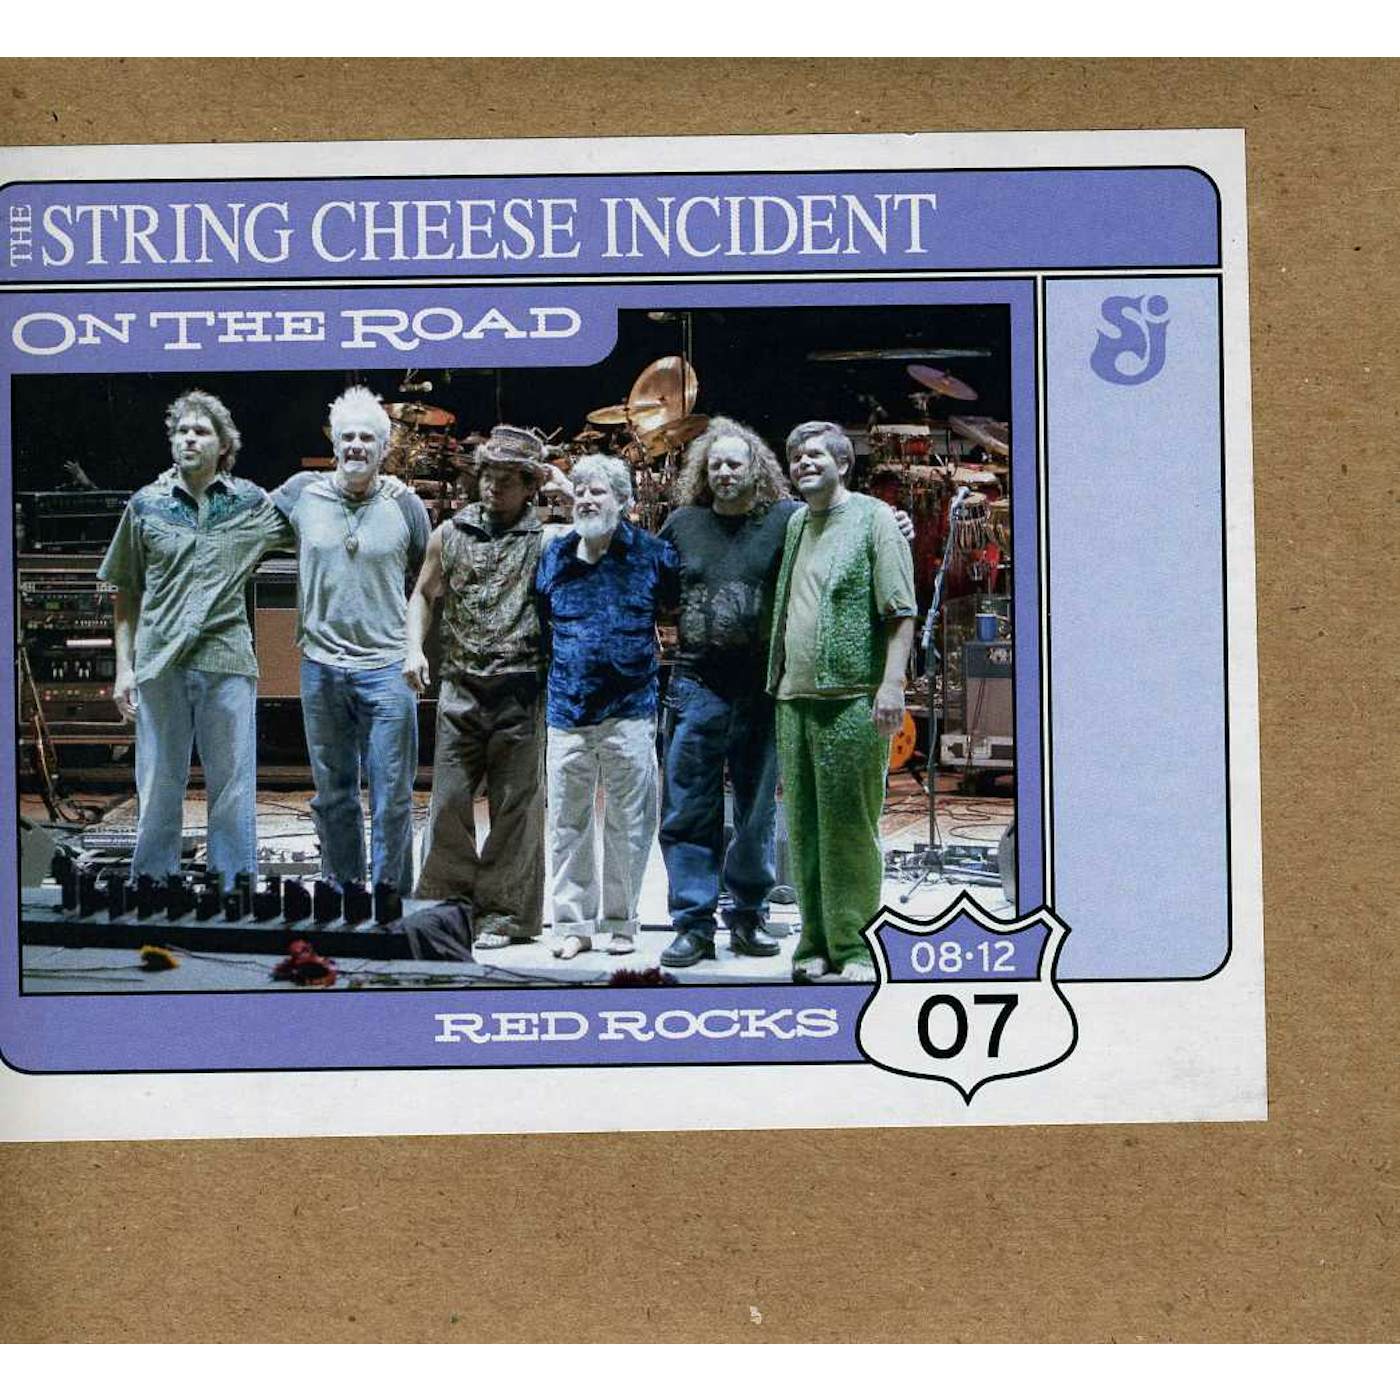 The String Cheese Incident OTR: MORRISON CO 8-12-07 CD